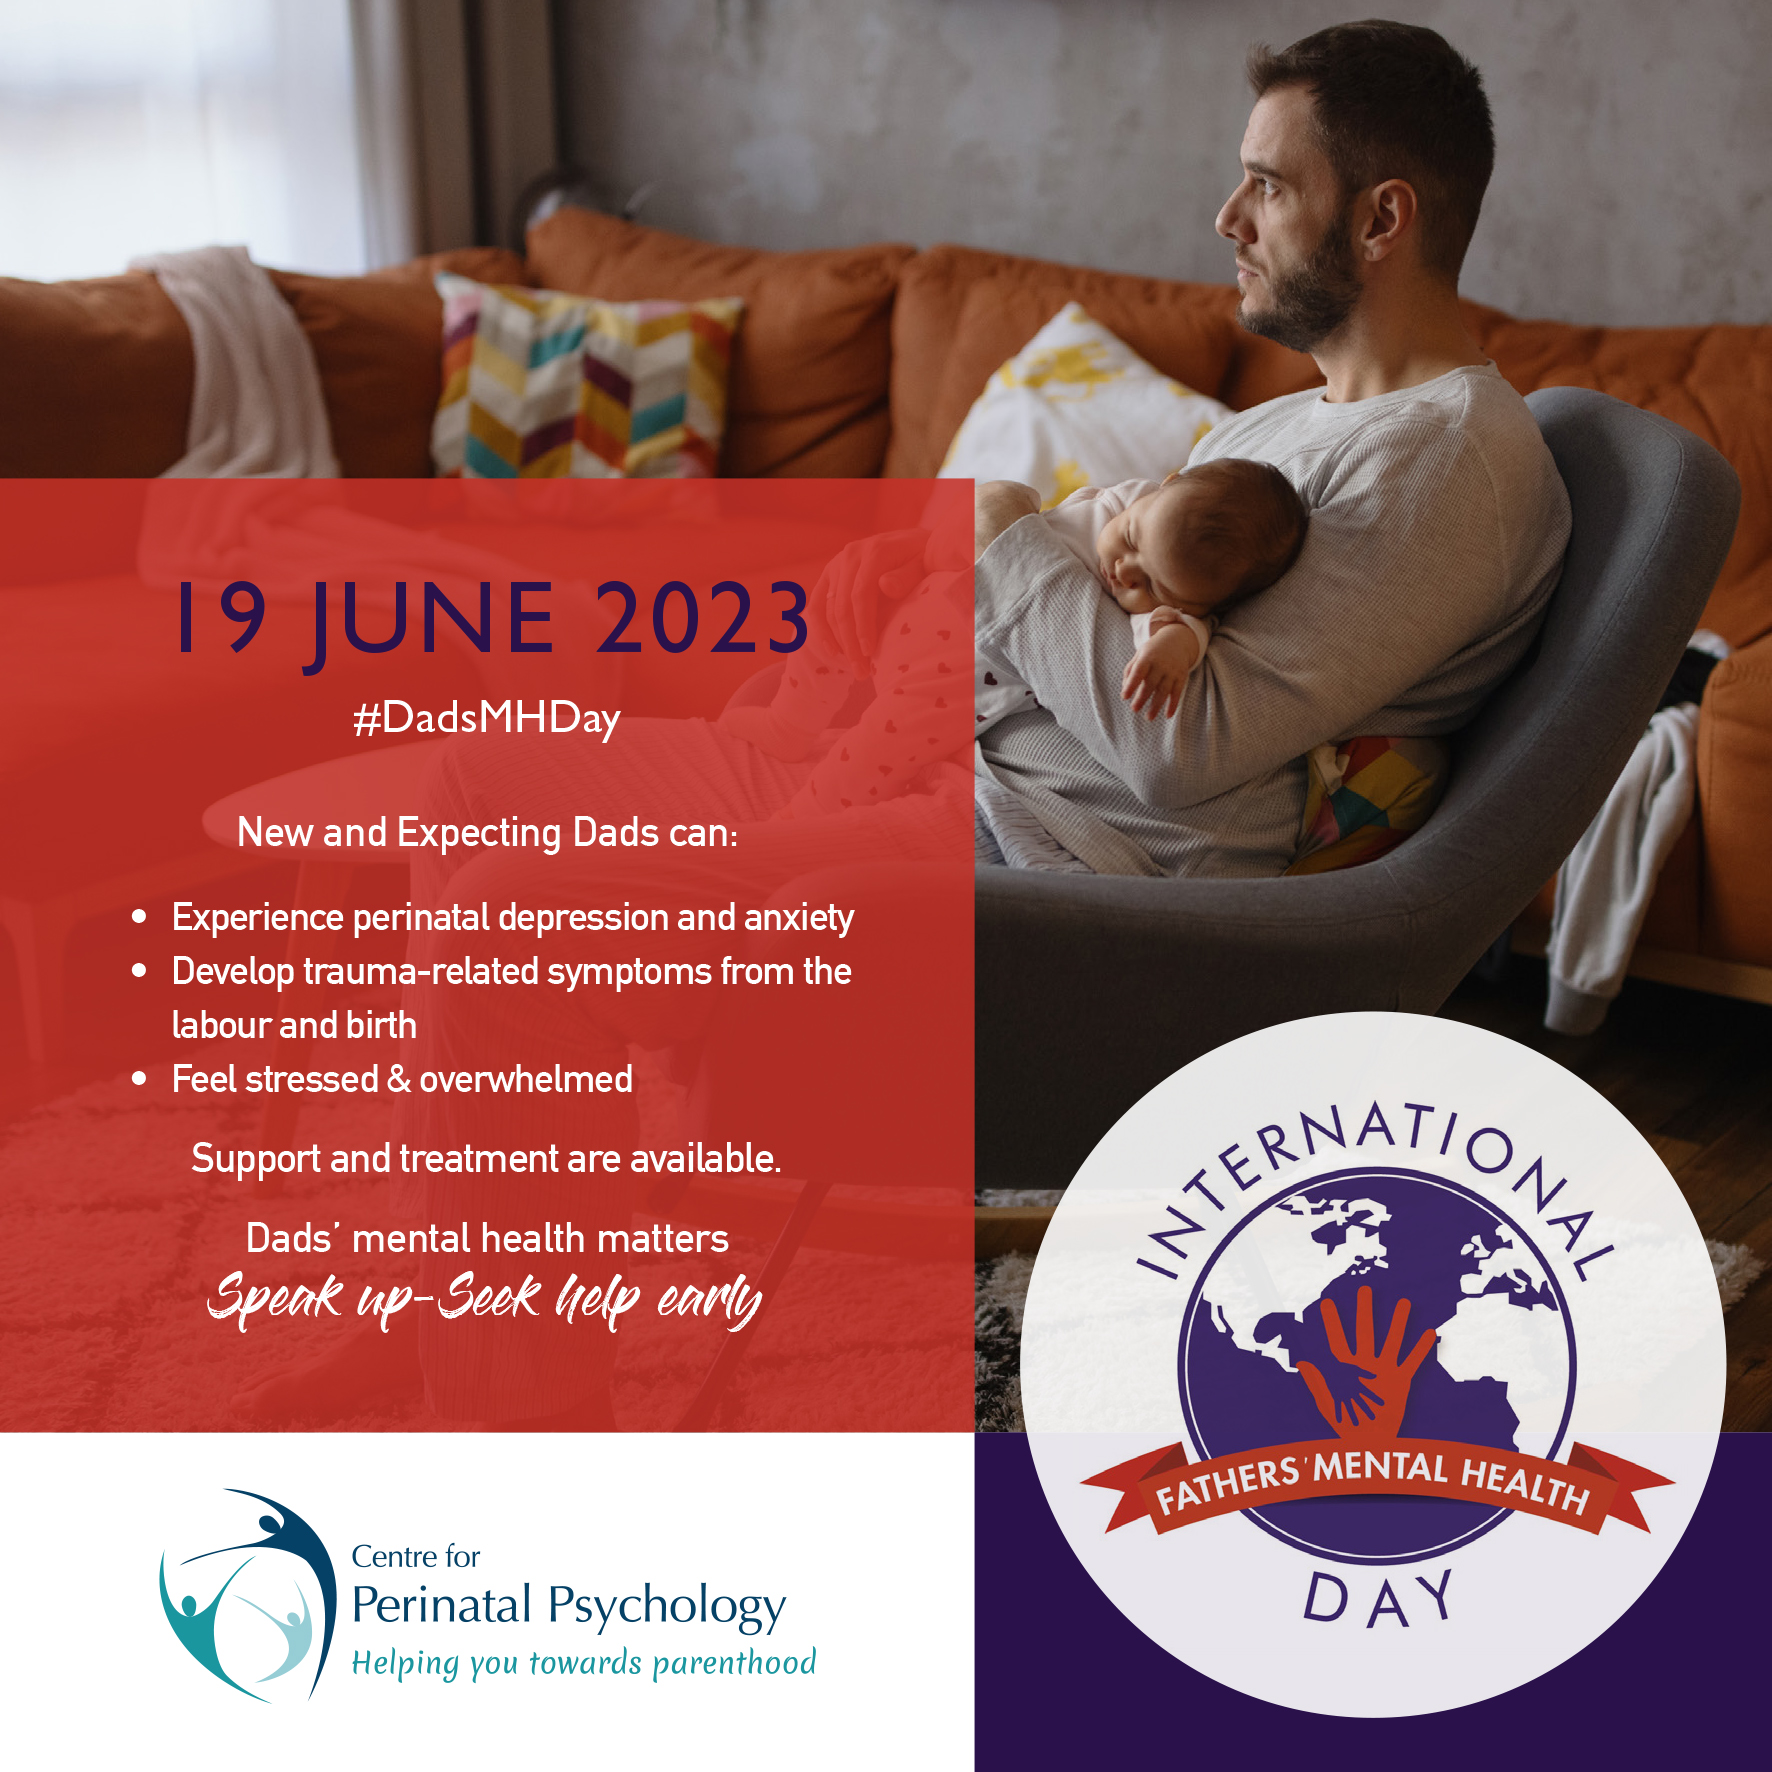 International Fathers' Mental Health Day Centre for Perinatal Psychology